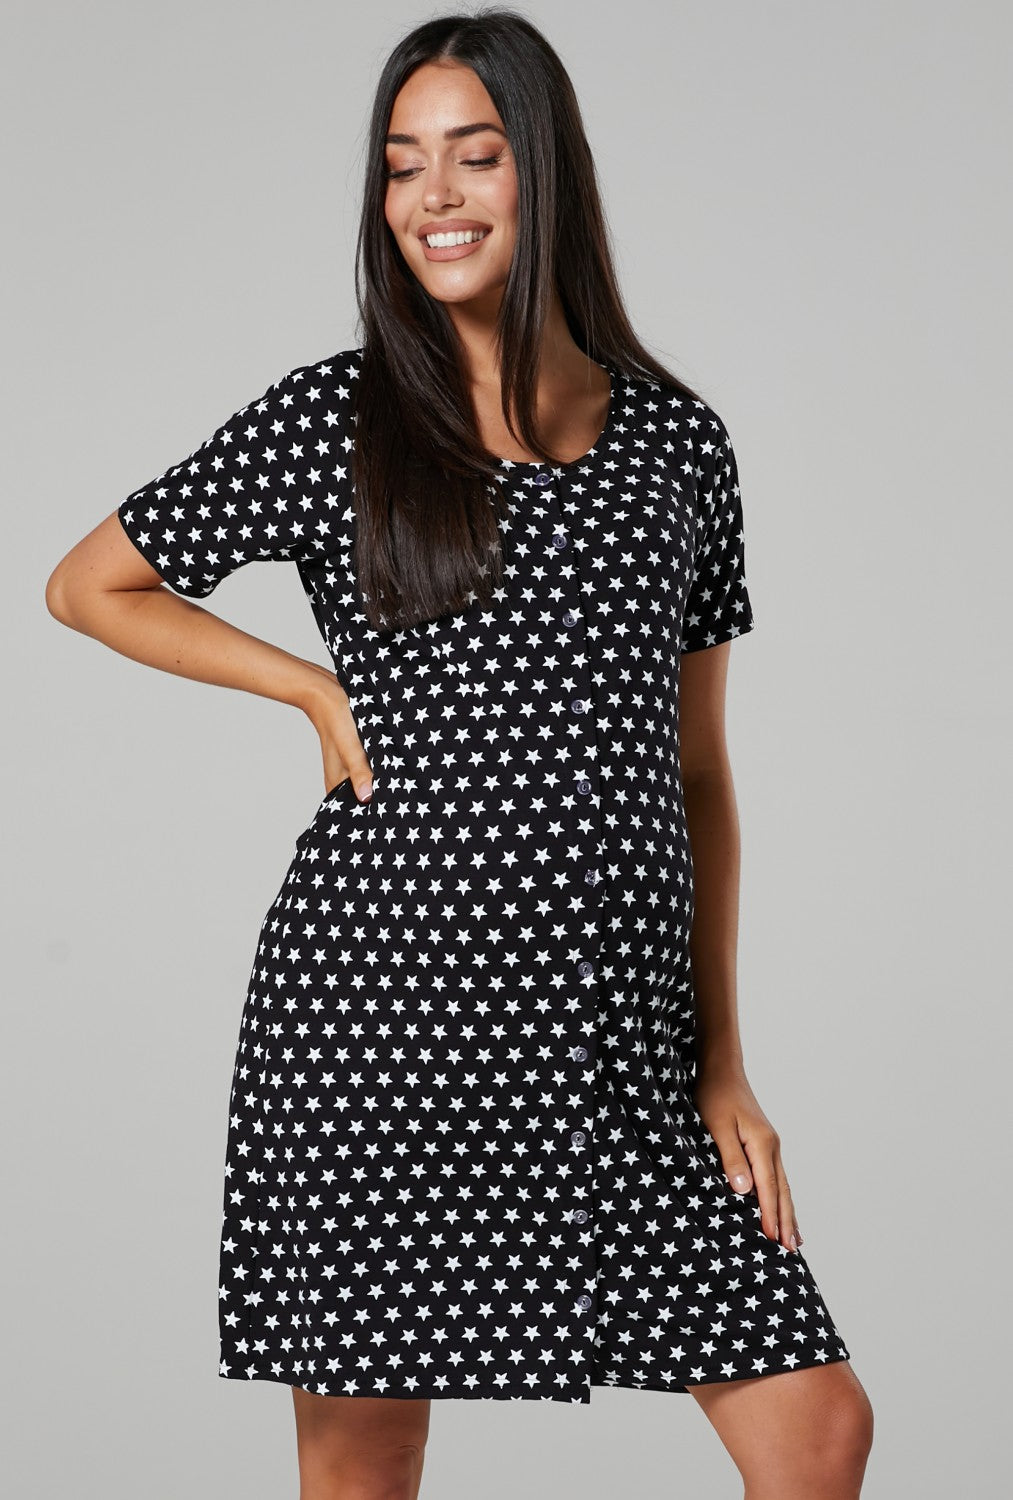 2-Pack Maternity Labour Delivery Gown